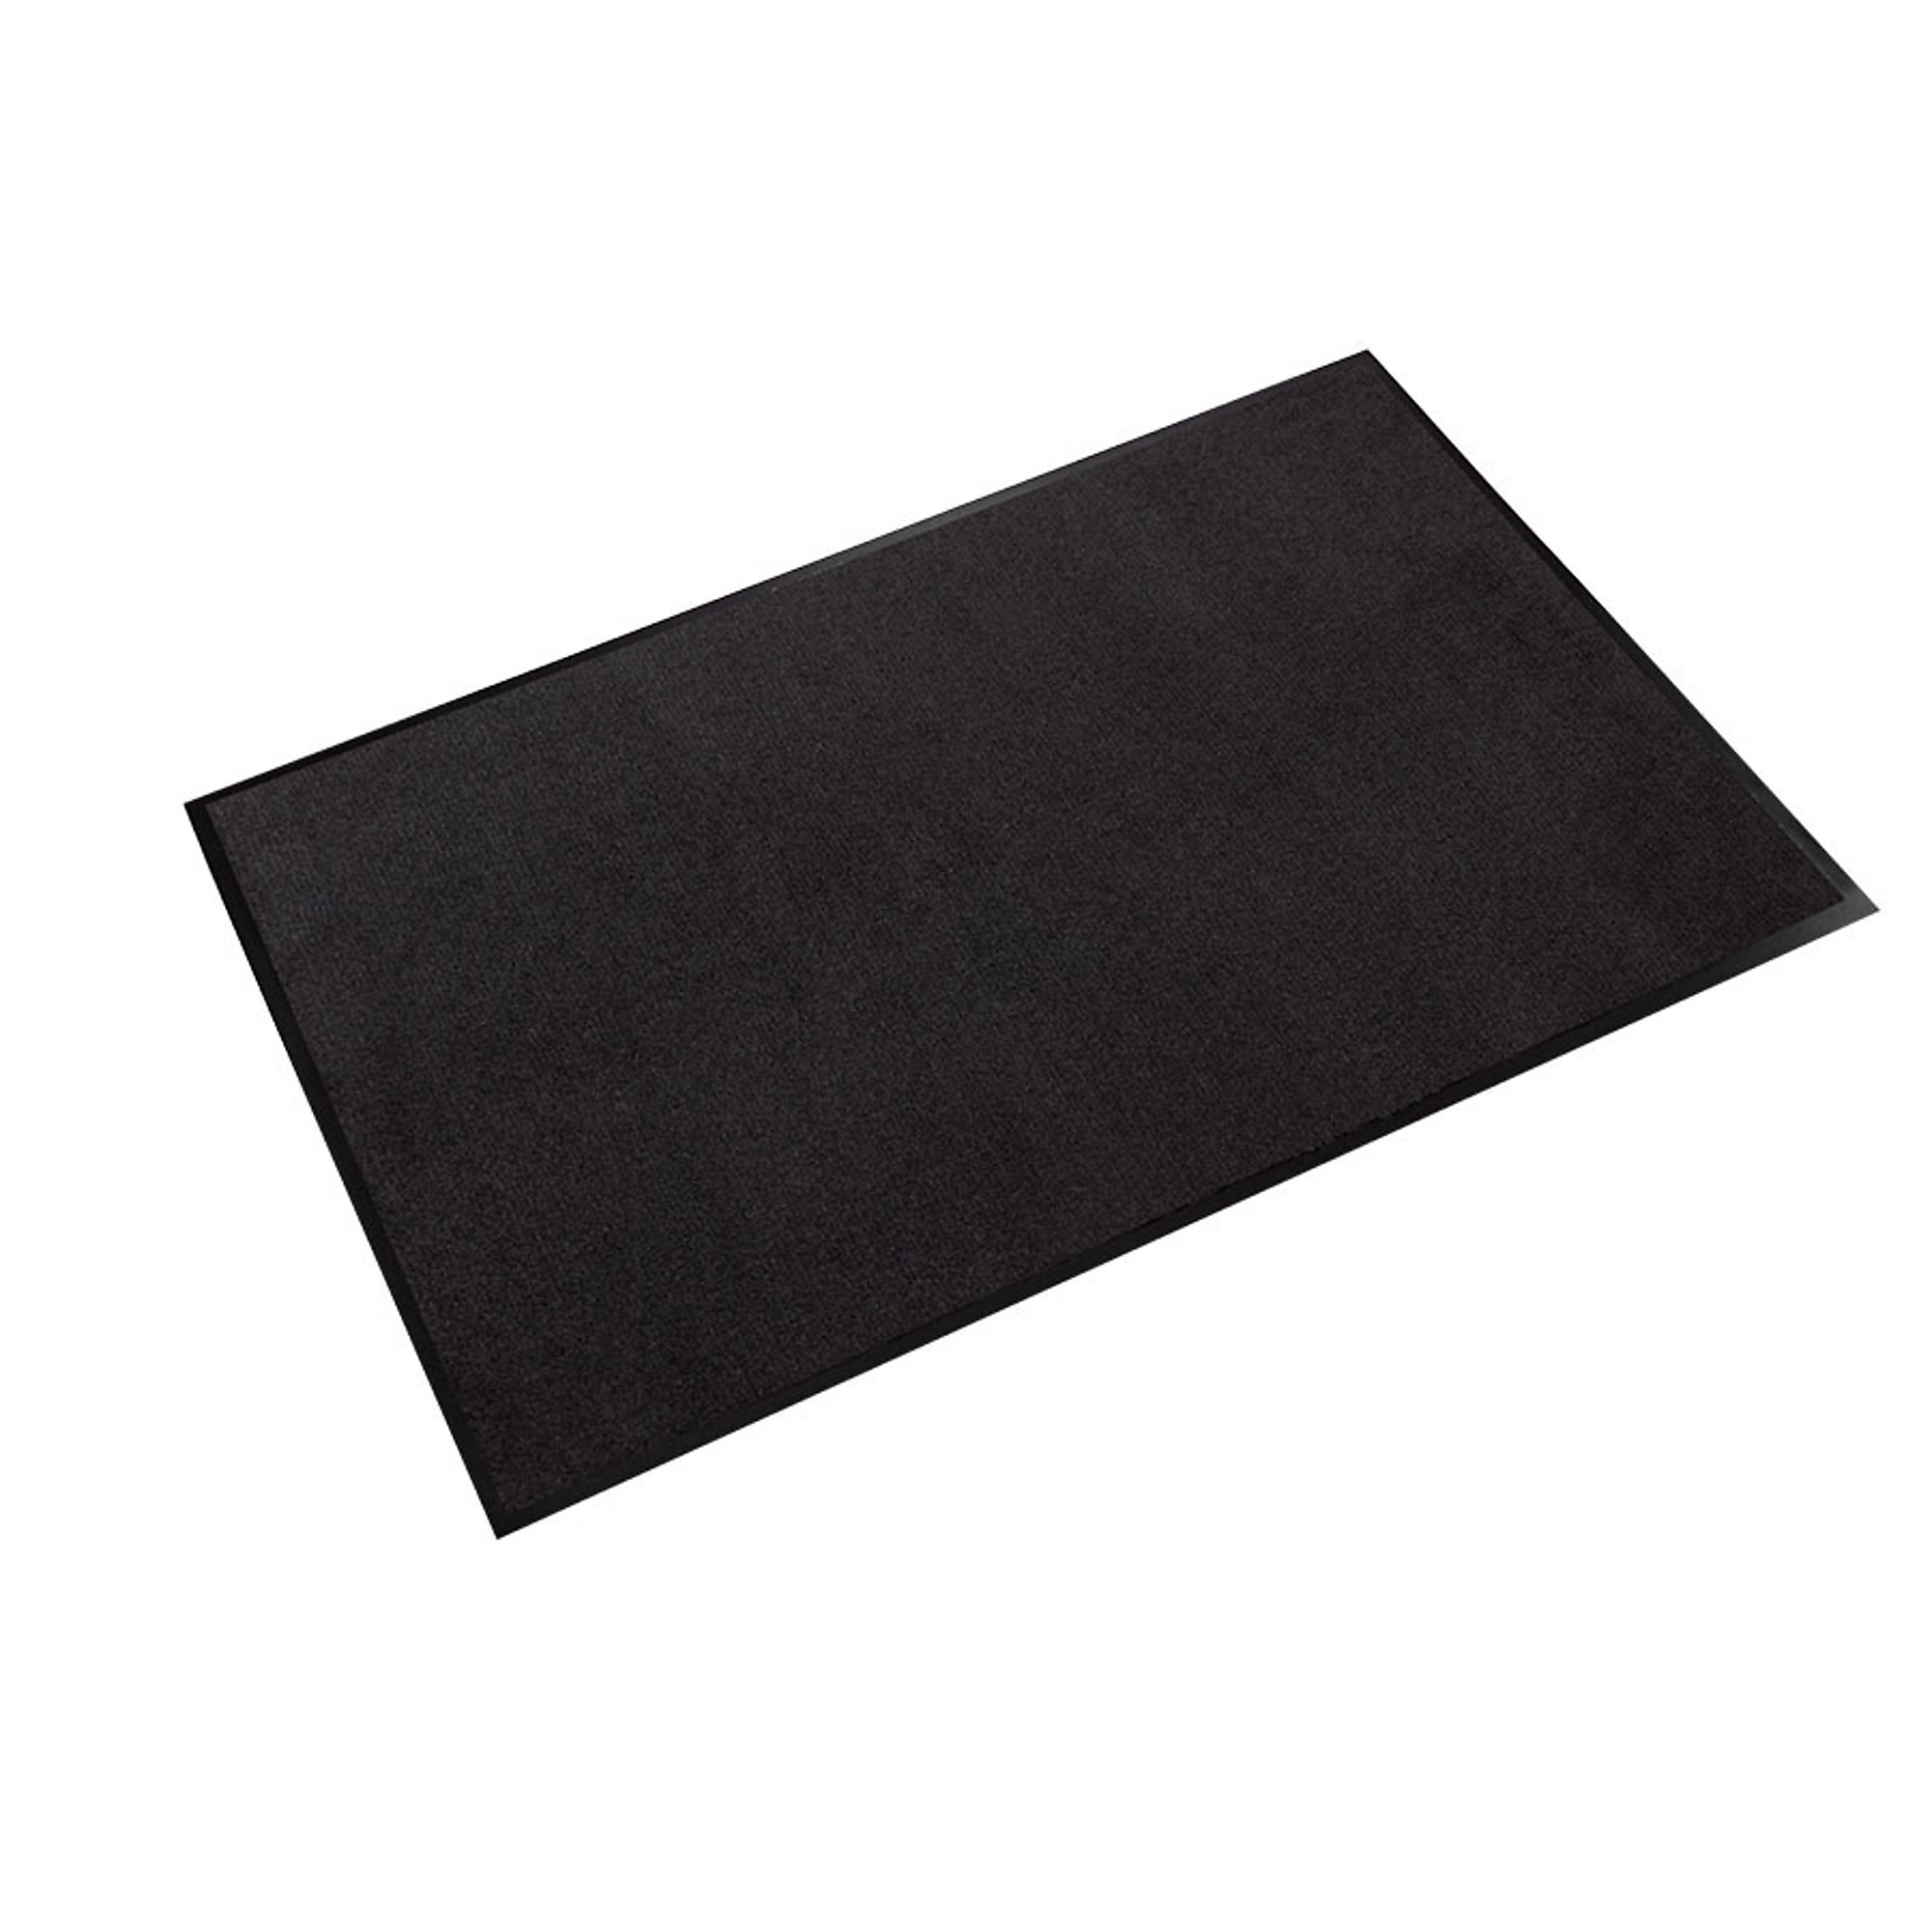 Crown Matting Technologies, Rely-On Olefin 6ft.x60ft. Black, Width 72 in, Length 720 in, Thickness 3/8 in, Model GSR0072BK